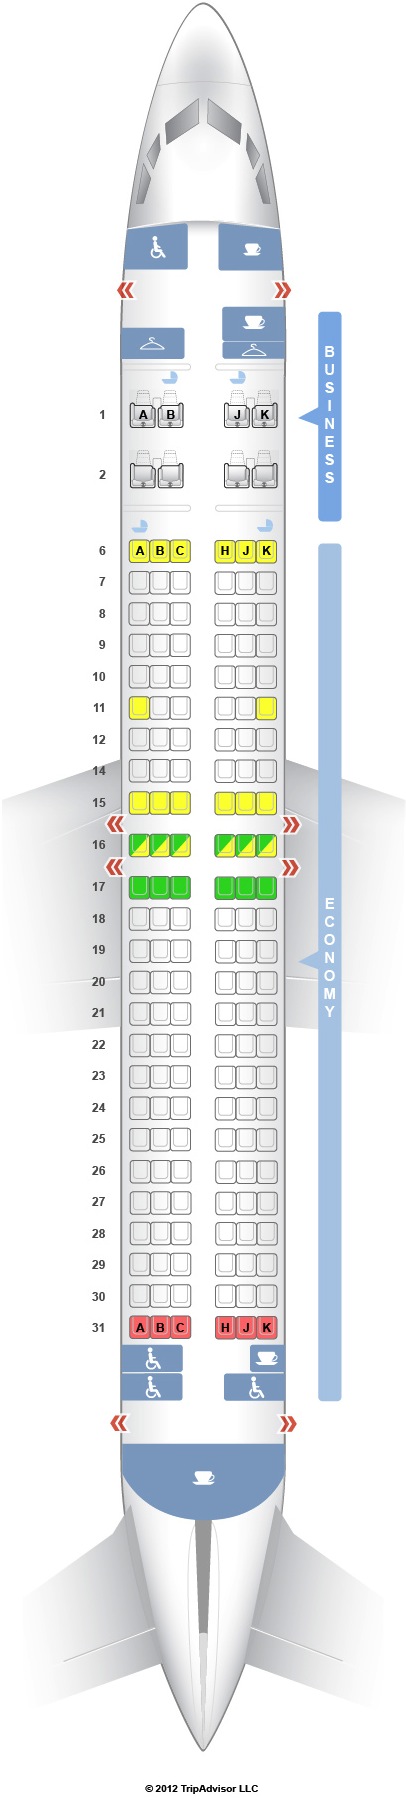 Boeing 737 800 Seating Chart Malaysia Airlines